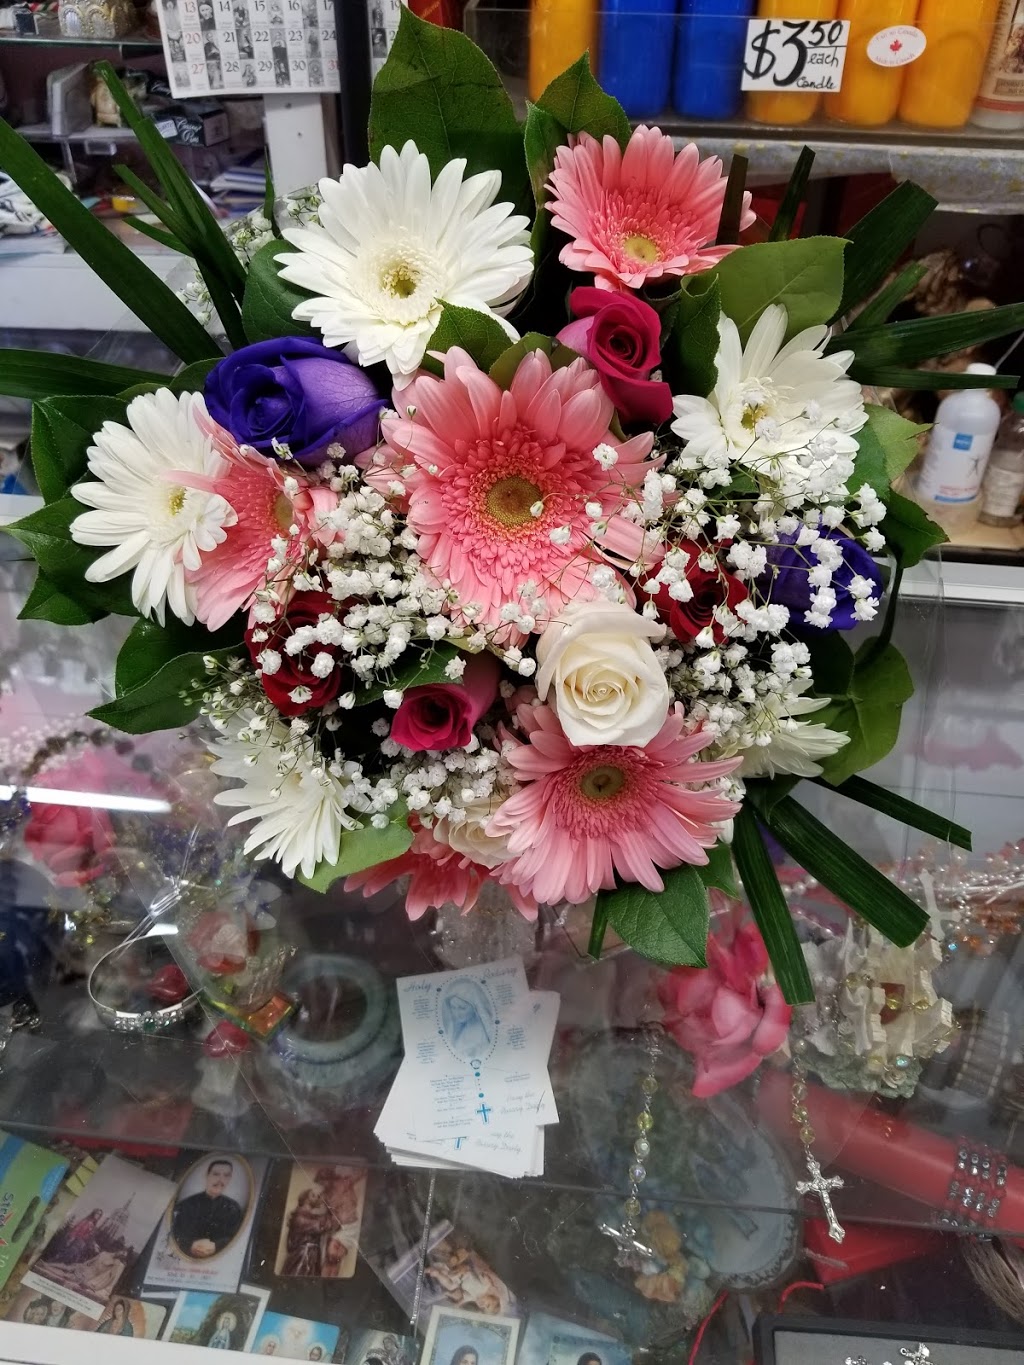 Toms Flower & Gift | florist | 1863 Eglinton Ave W, York, ON M6E 3X2, Canada | 4169399279 OR +1 416-939-9279